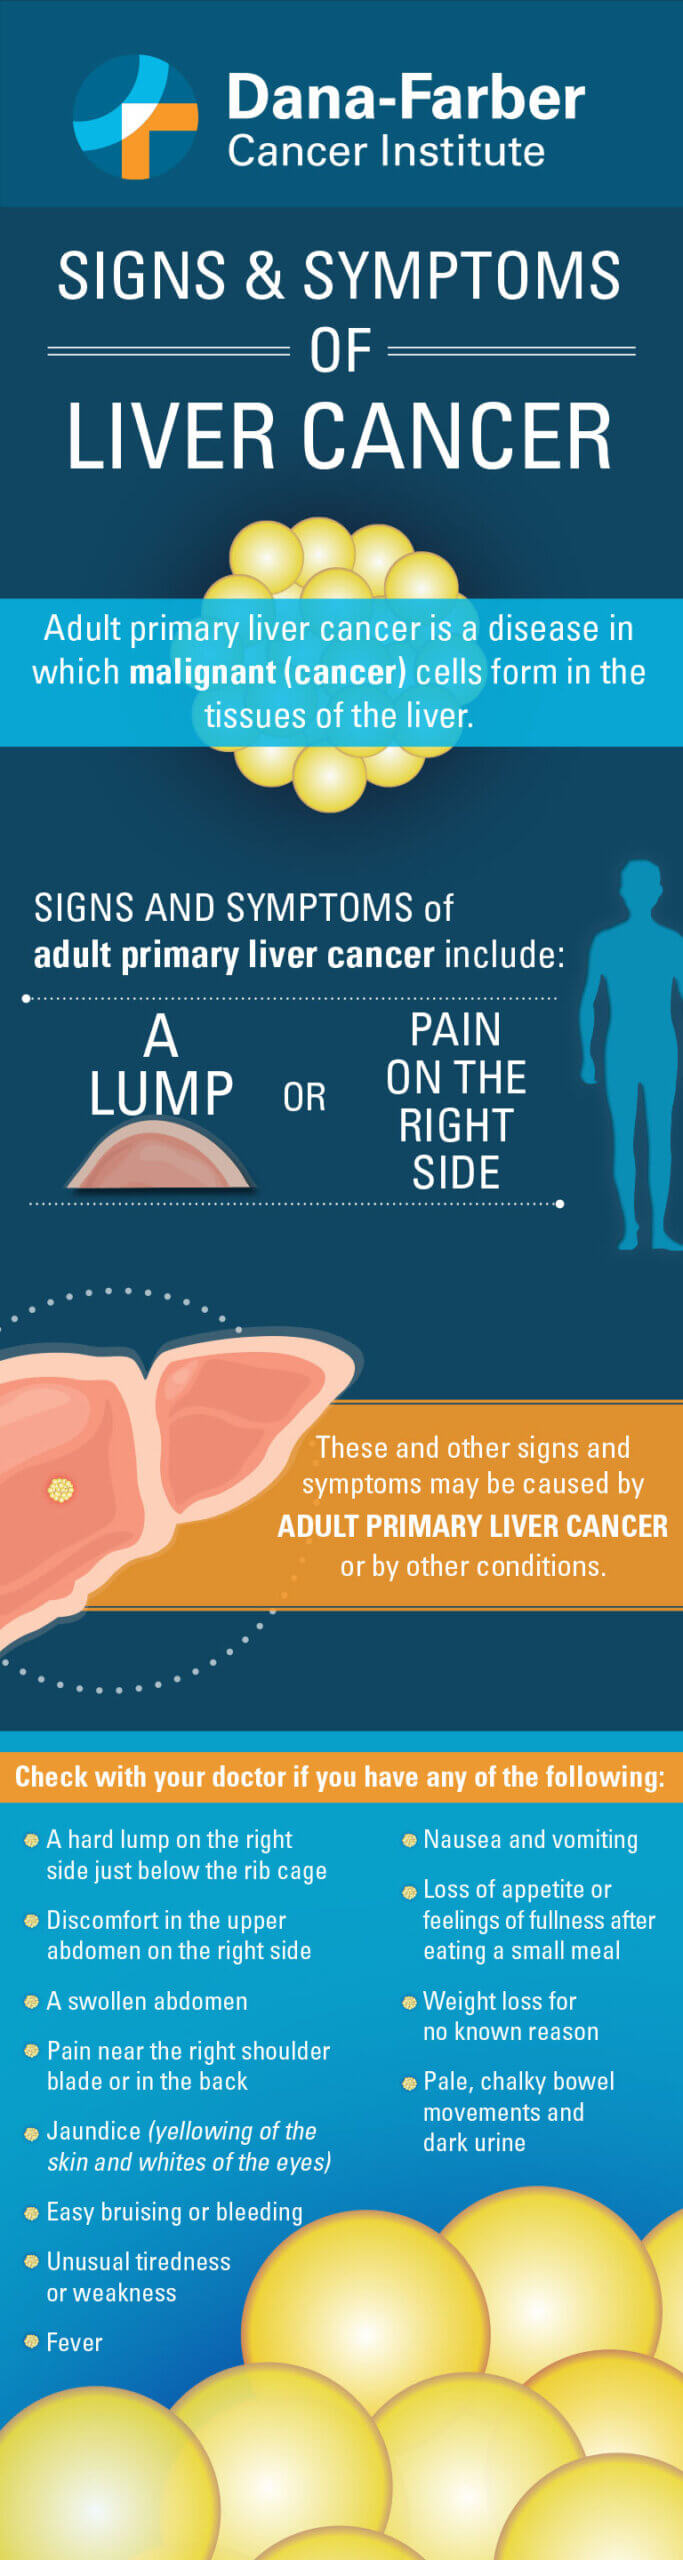 Signs And Symptoms Of Liver Cancer Infographic Dana Farber Cancer Institute 0980